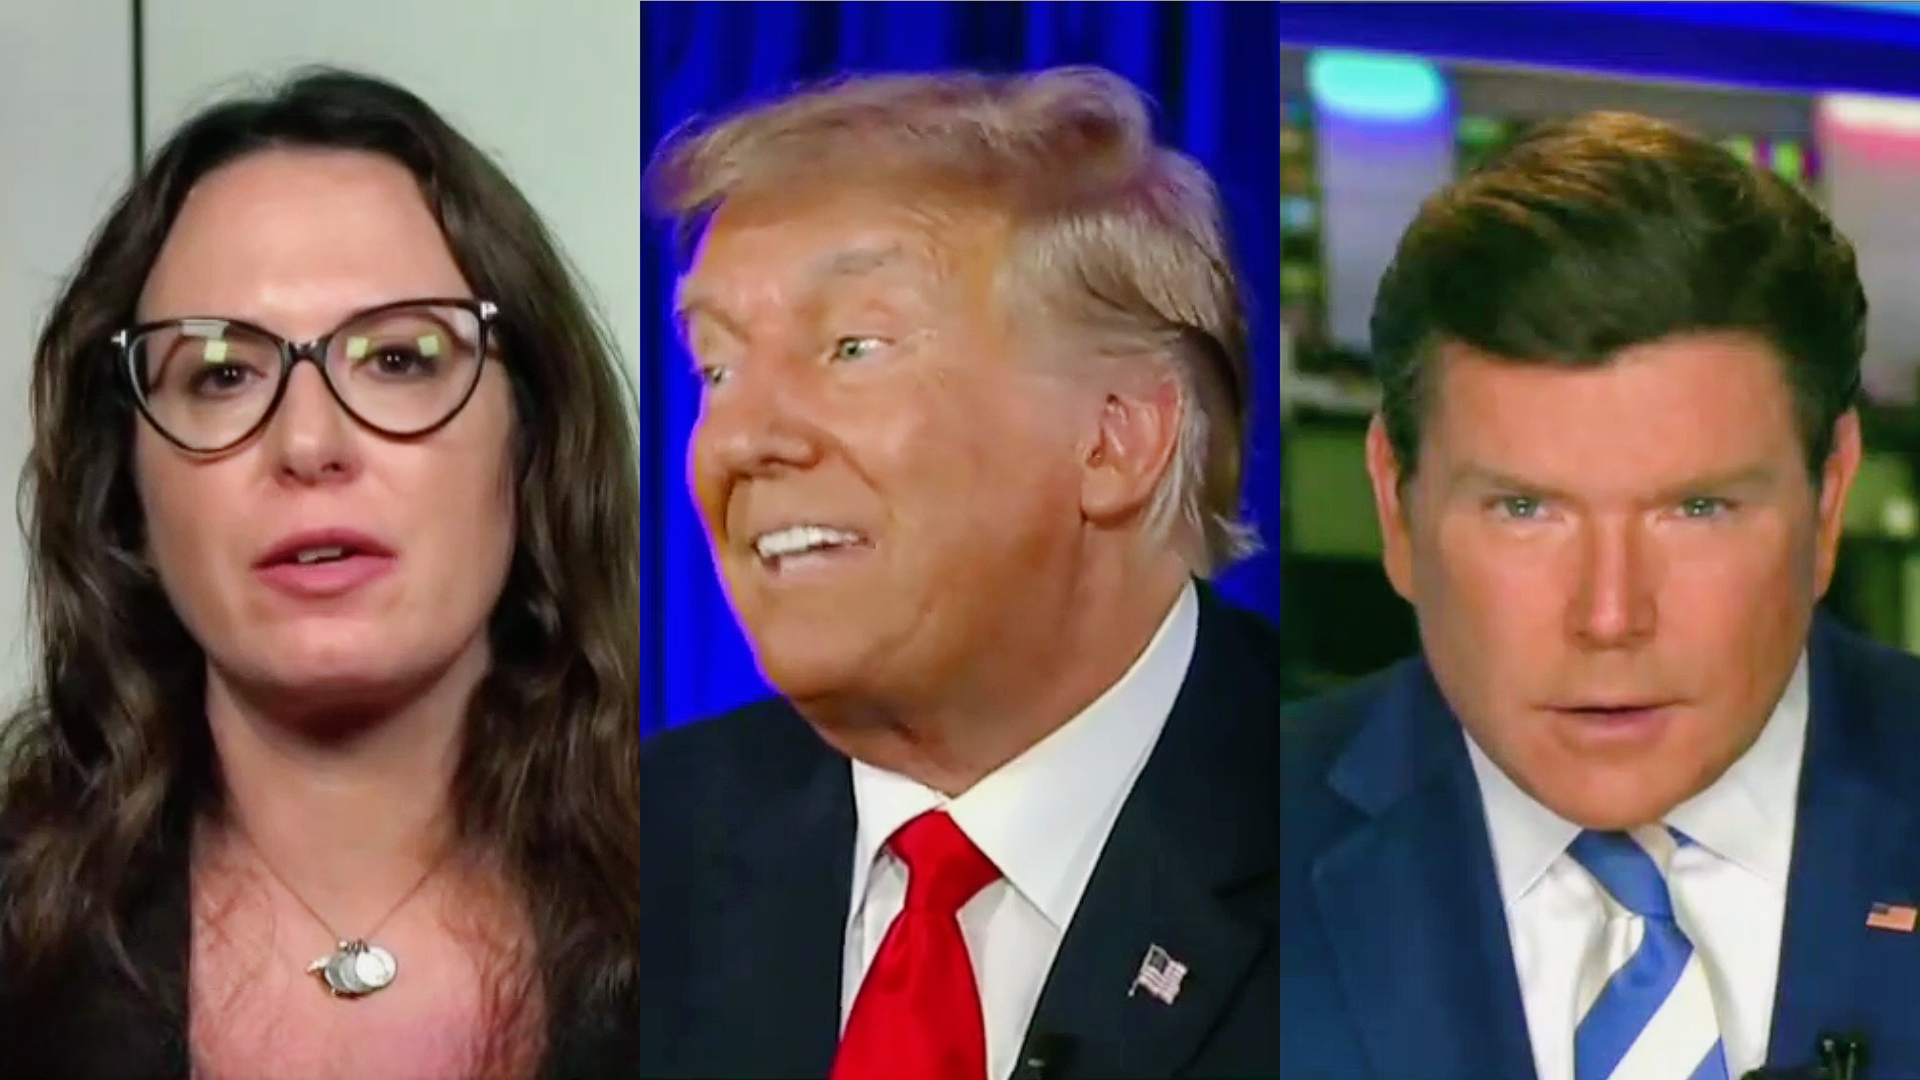 Maggie Haberman Sources Say Trump Held Up Phone For Dinner Guests To See — It Was Bret Baier Calling About Fox News Debate